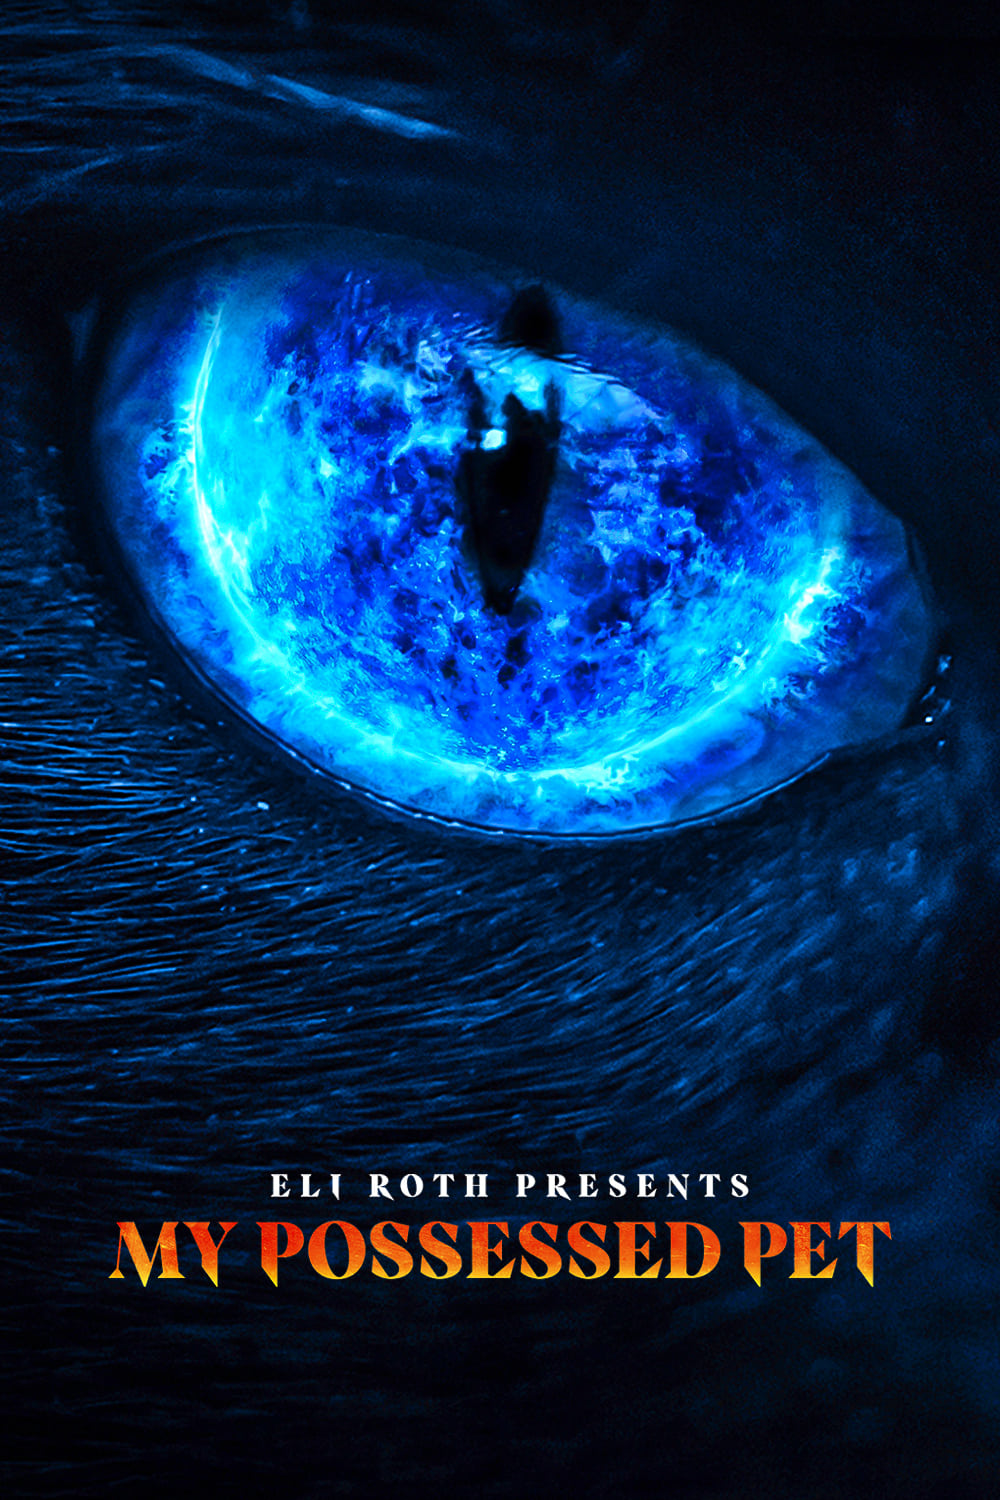 Eli Roth Presents: My Possessed Pet TV Shows About Horror